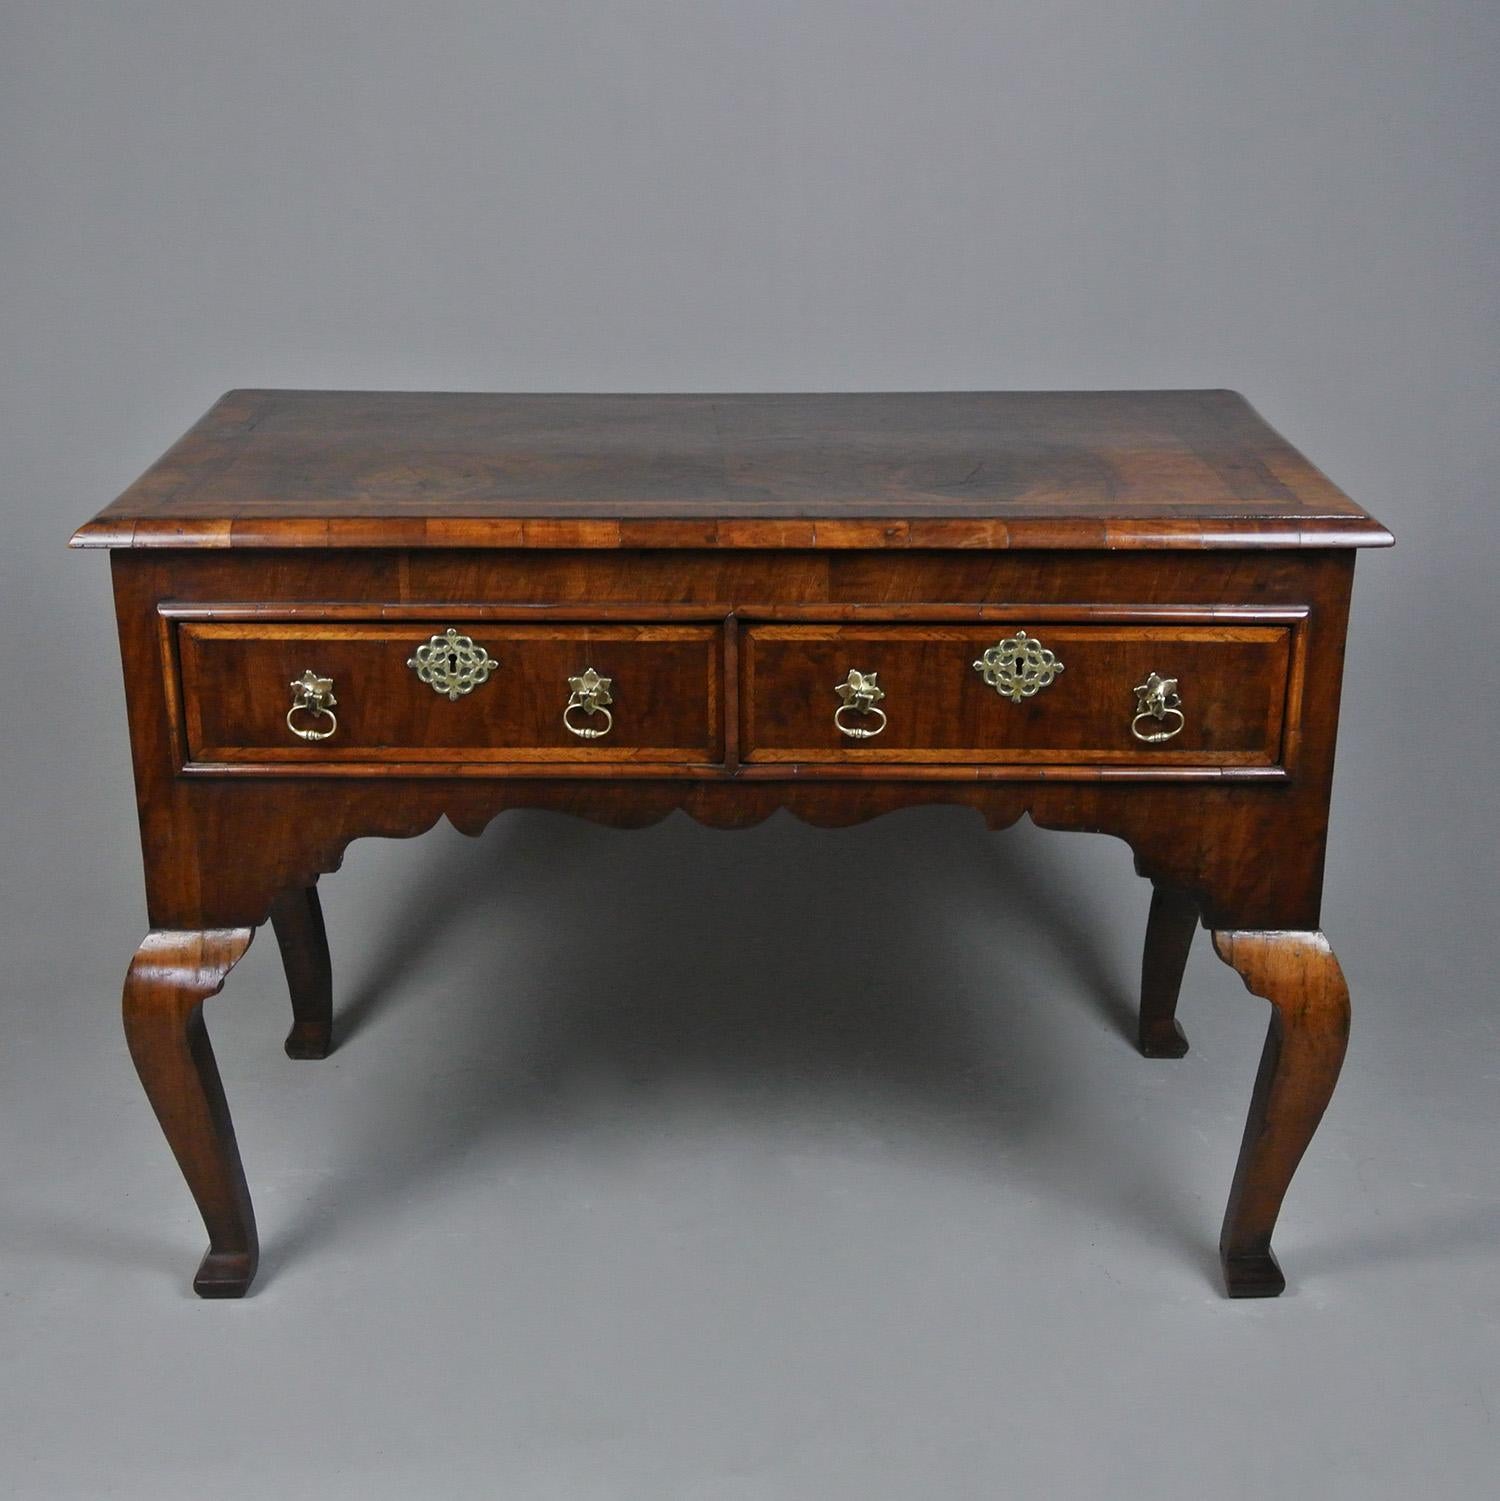 A very handsome and early Georgian figured walnut dressing table on cabriole legs with three featherbanded frieze drawers each with twin brass drop handles with split pin fixings and which appear to be original and lovely elaborately pierced